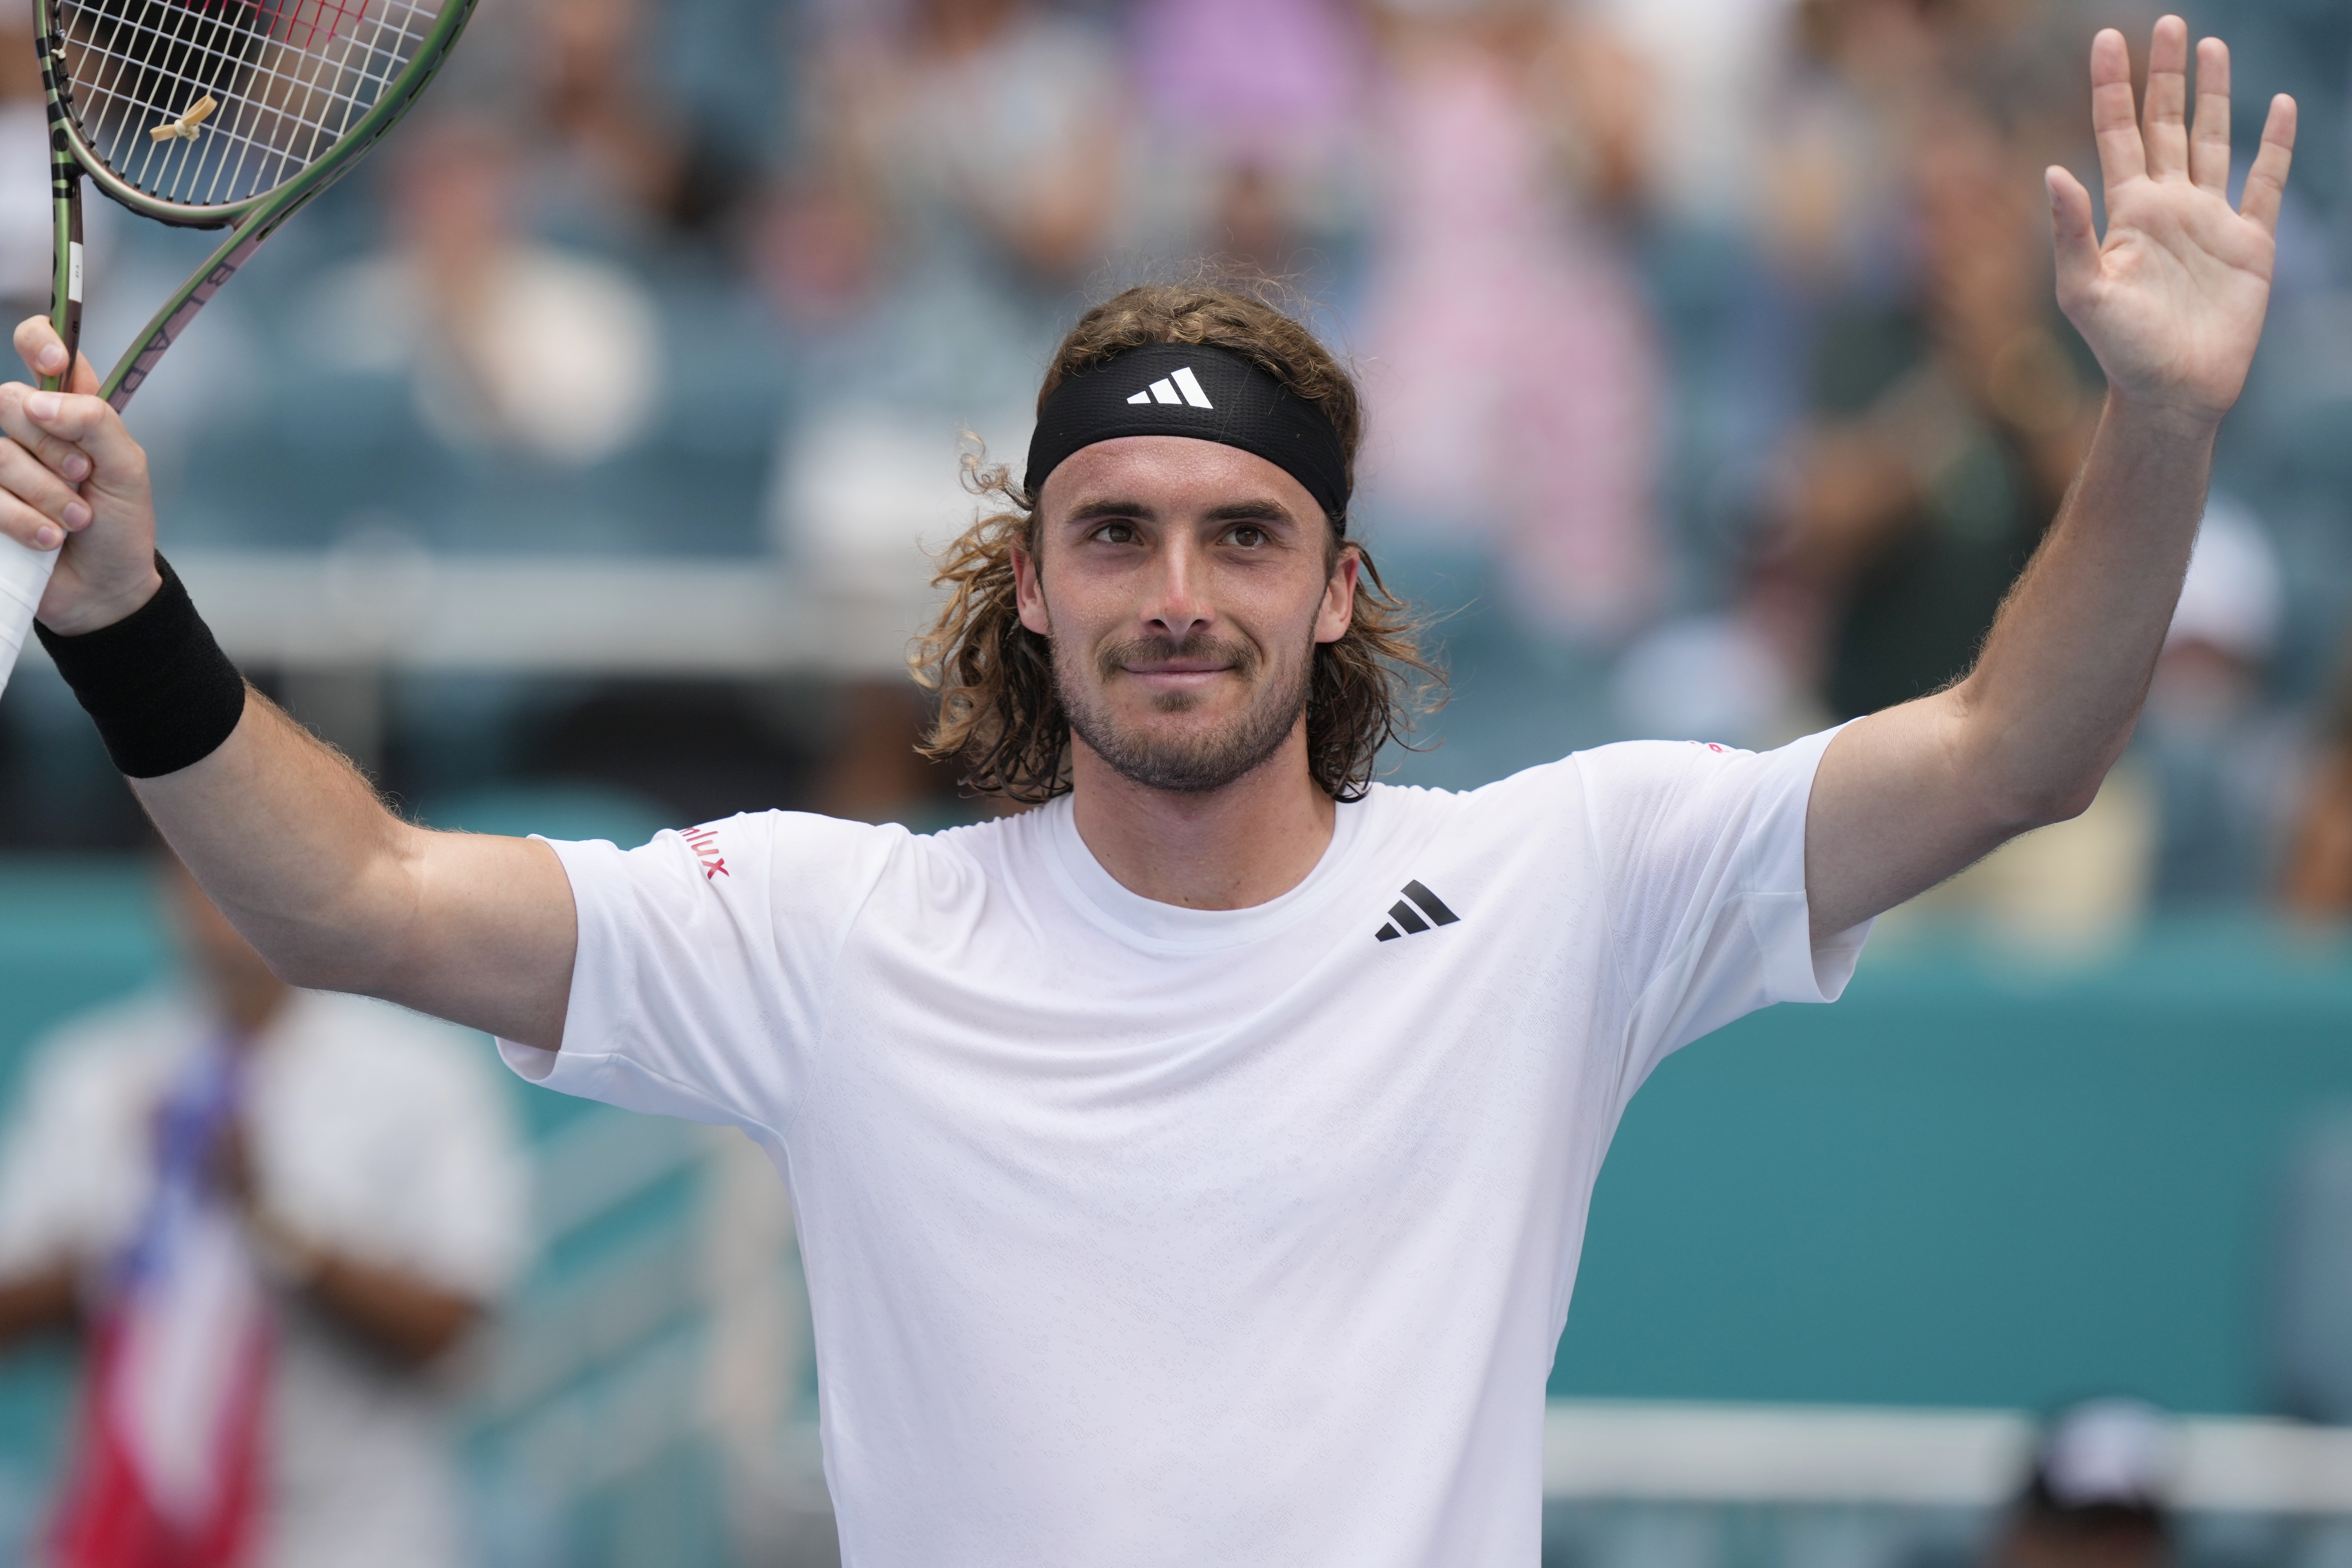 Stefanos Tsitsipas of Greece greets the fans after beating Cristian Garin of of Chile in the round of 16 of the Miami Open on Monday, March 27, 2023. (AP Photo/Marta Lavandier)